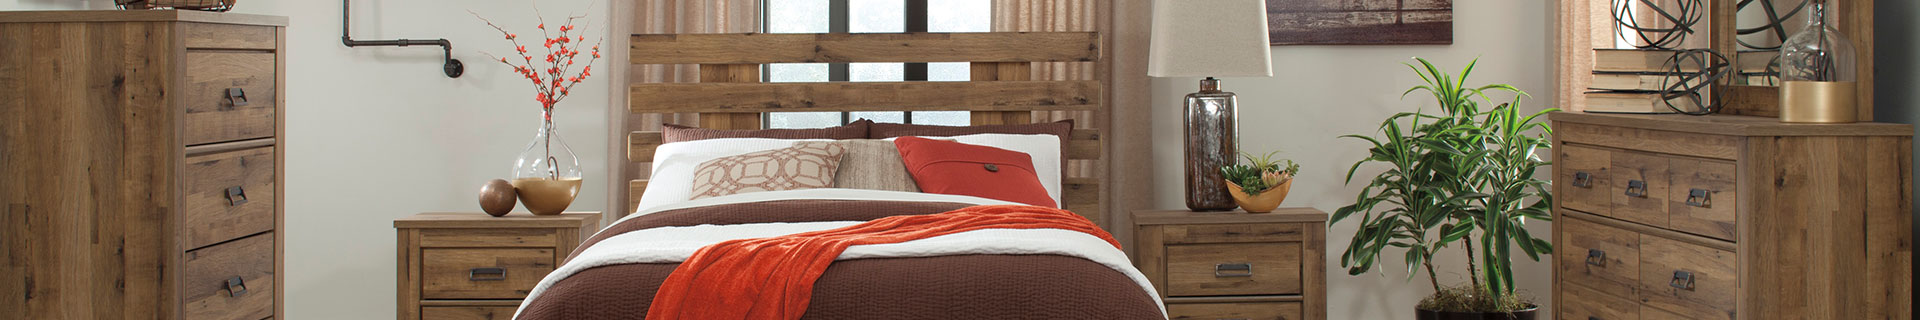 Contemporary, wooden bed set.